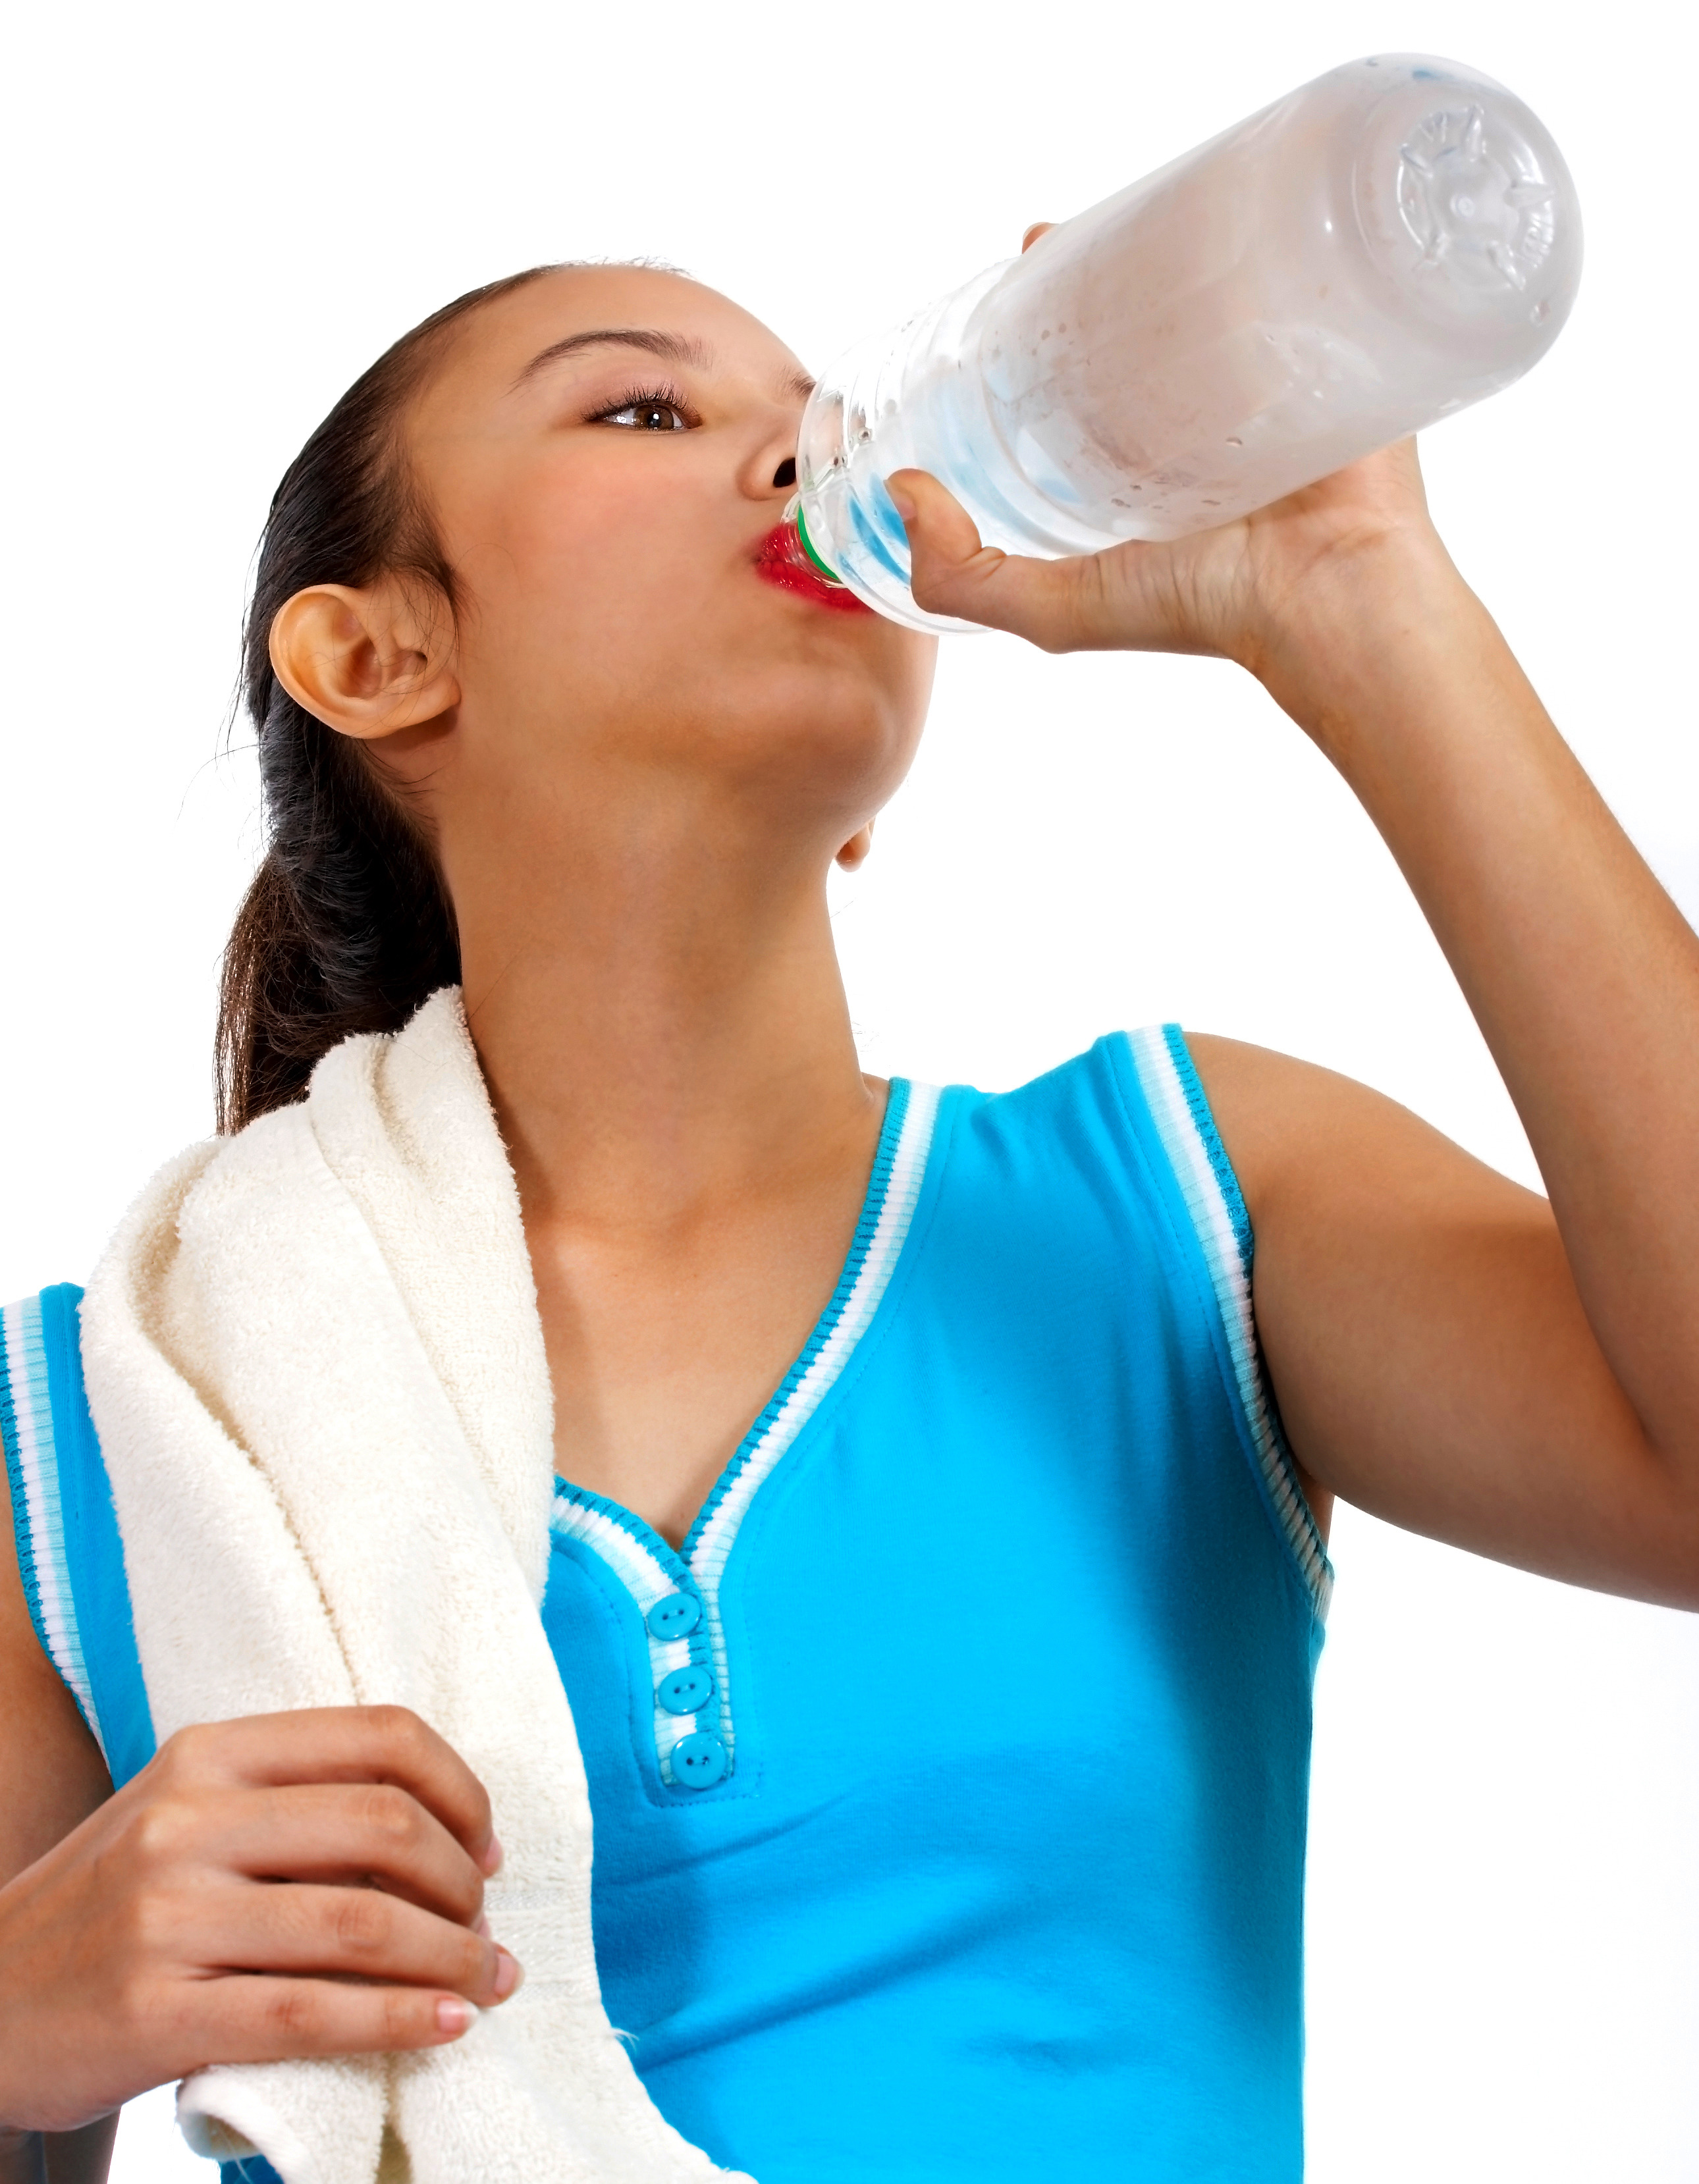 http://agereverser.com/wp-content/uploads/2015/07/thirsty-girl-drinking-water-after-exercise_fyYQiNDu.jpg